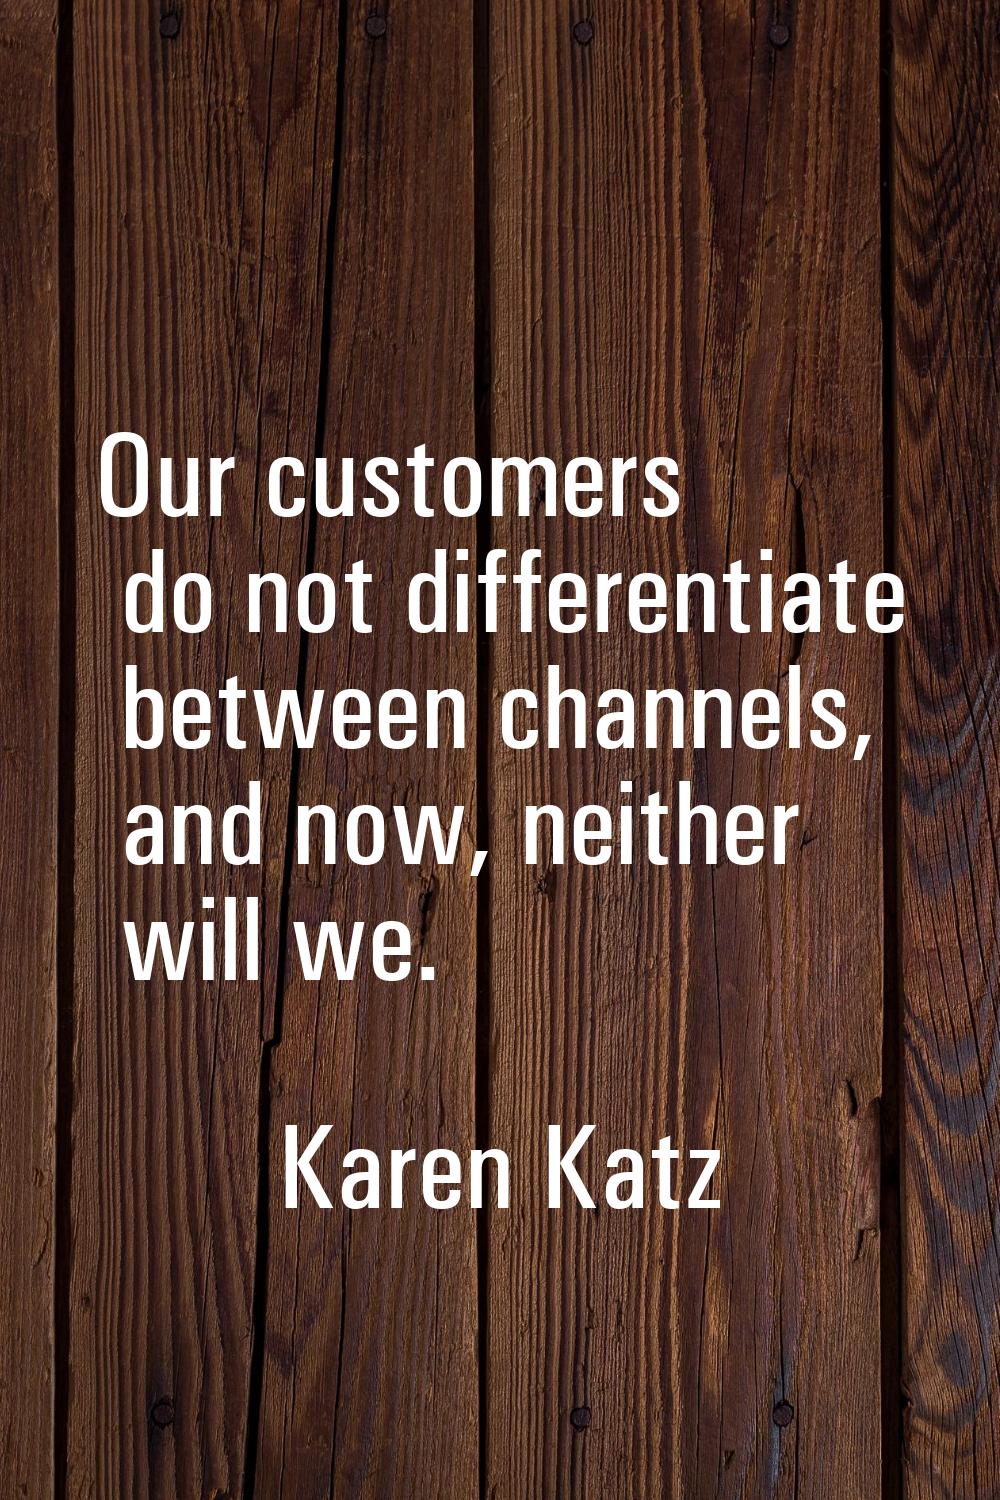 Our customers do not differentiate between channels, and now, neither will we.